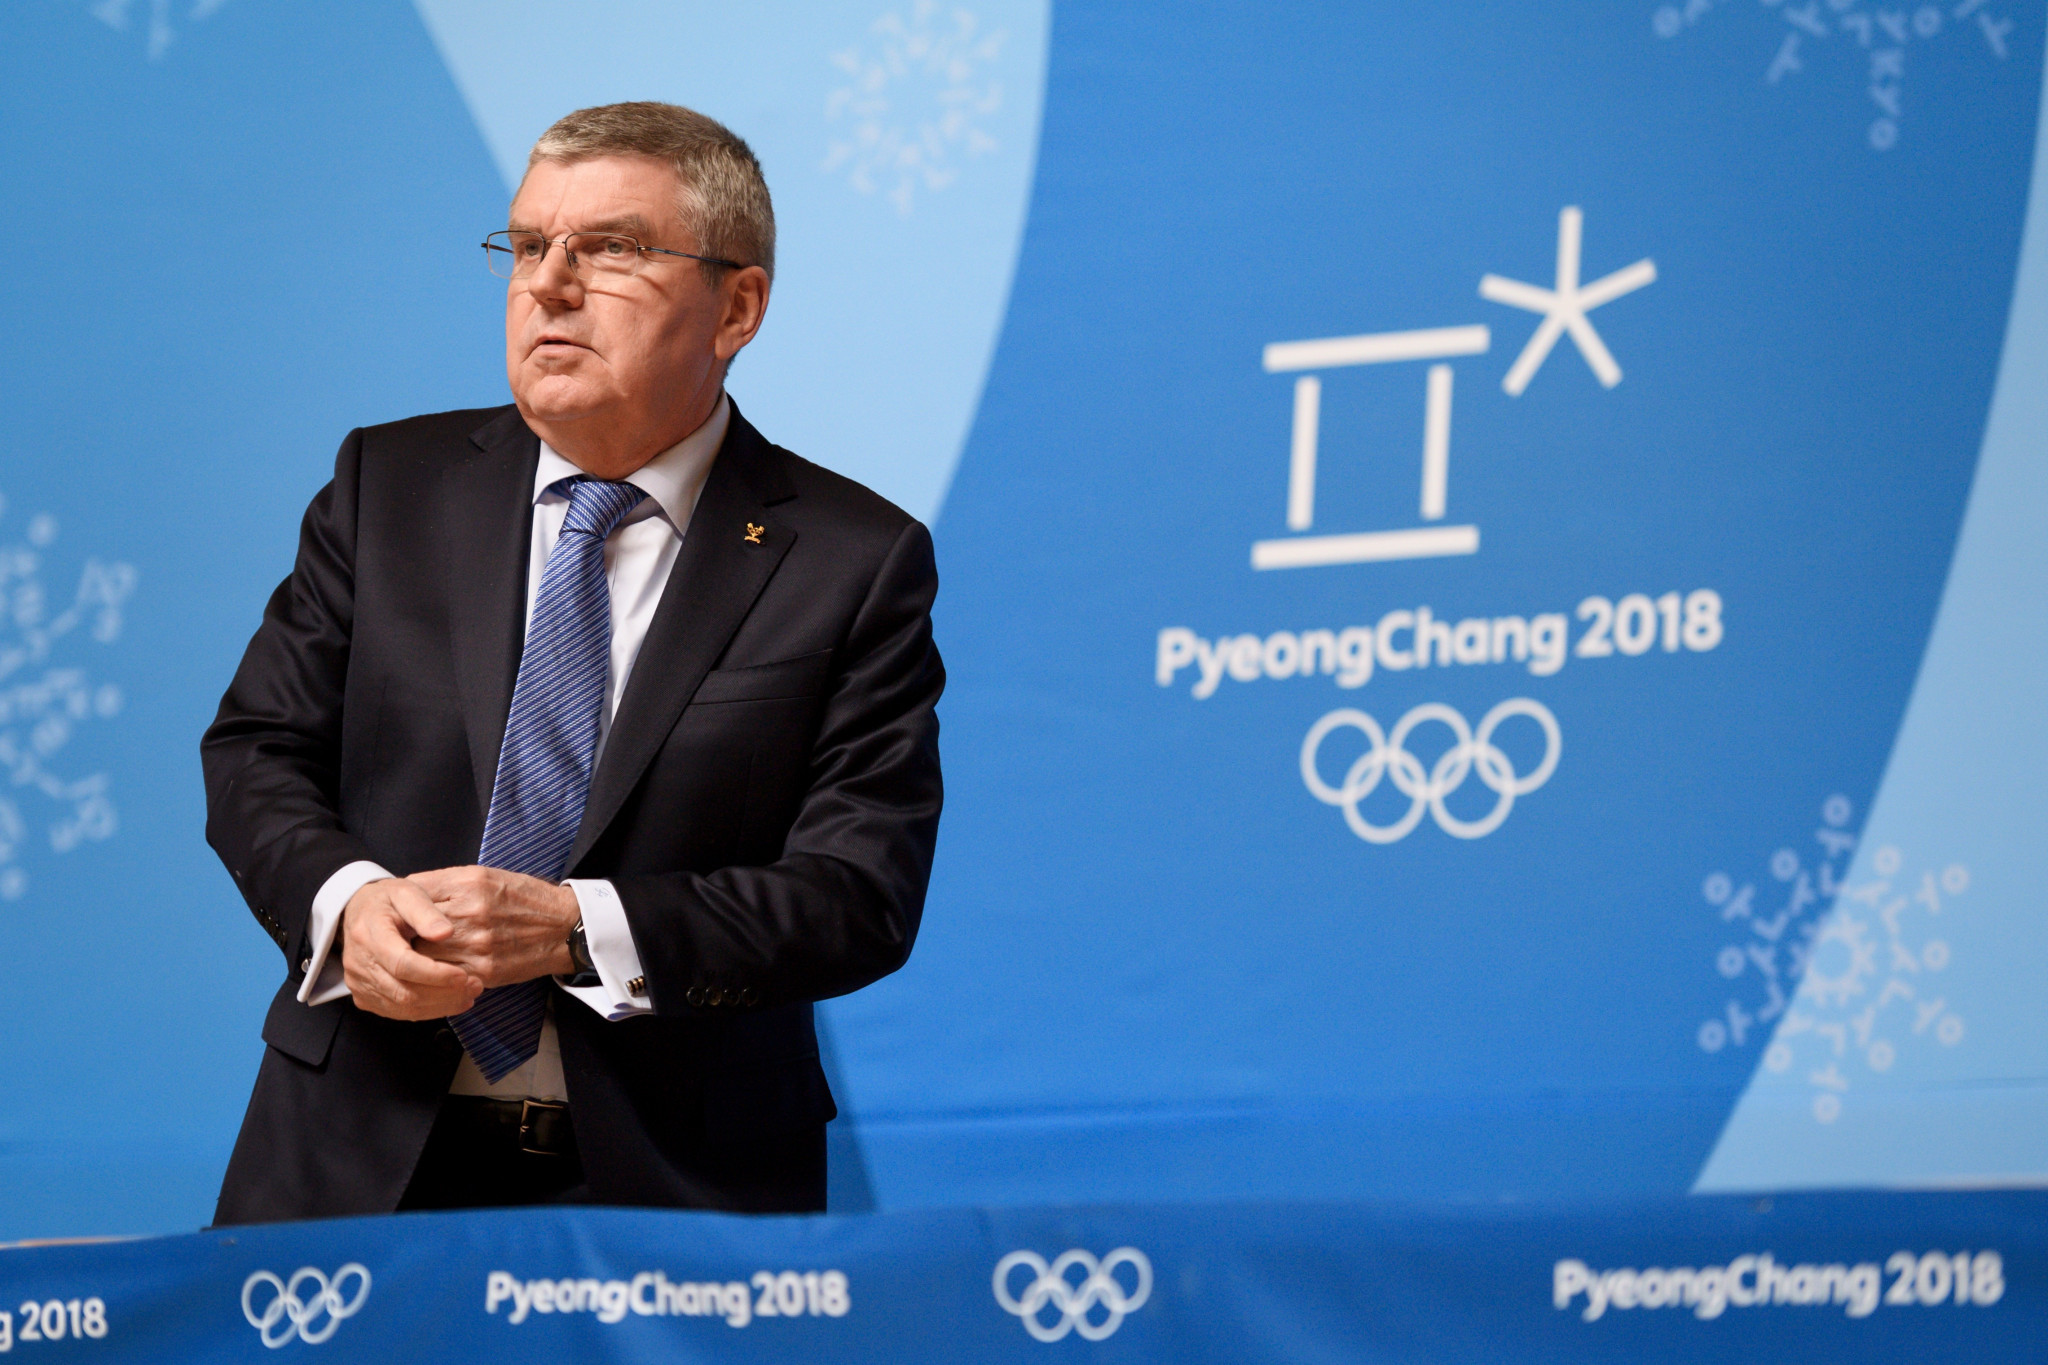 IOC President Thomas Bach has called for reforms of Court of Arbitration for Sport in the wake of their controversial decisions on the Sochi 2014 Russian cases ©Getty Images